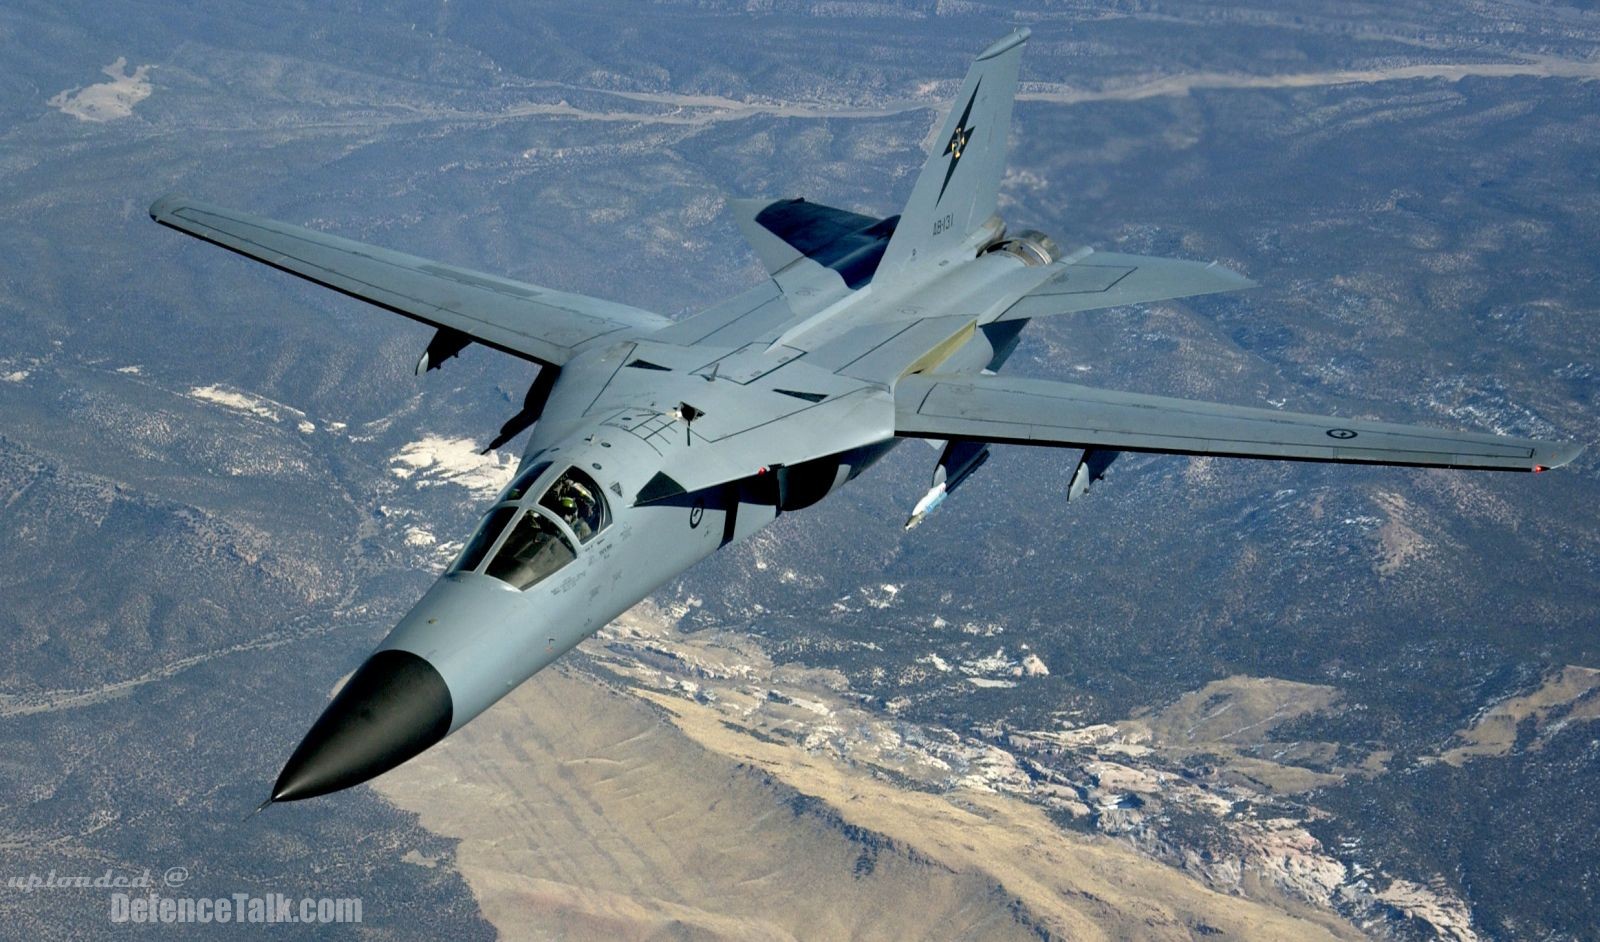 1SQN F-111C over Nellis AFB, Nevada, during Red Flag '06